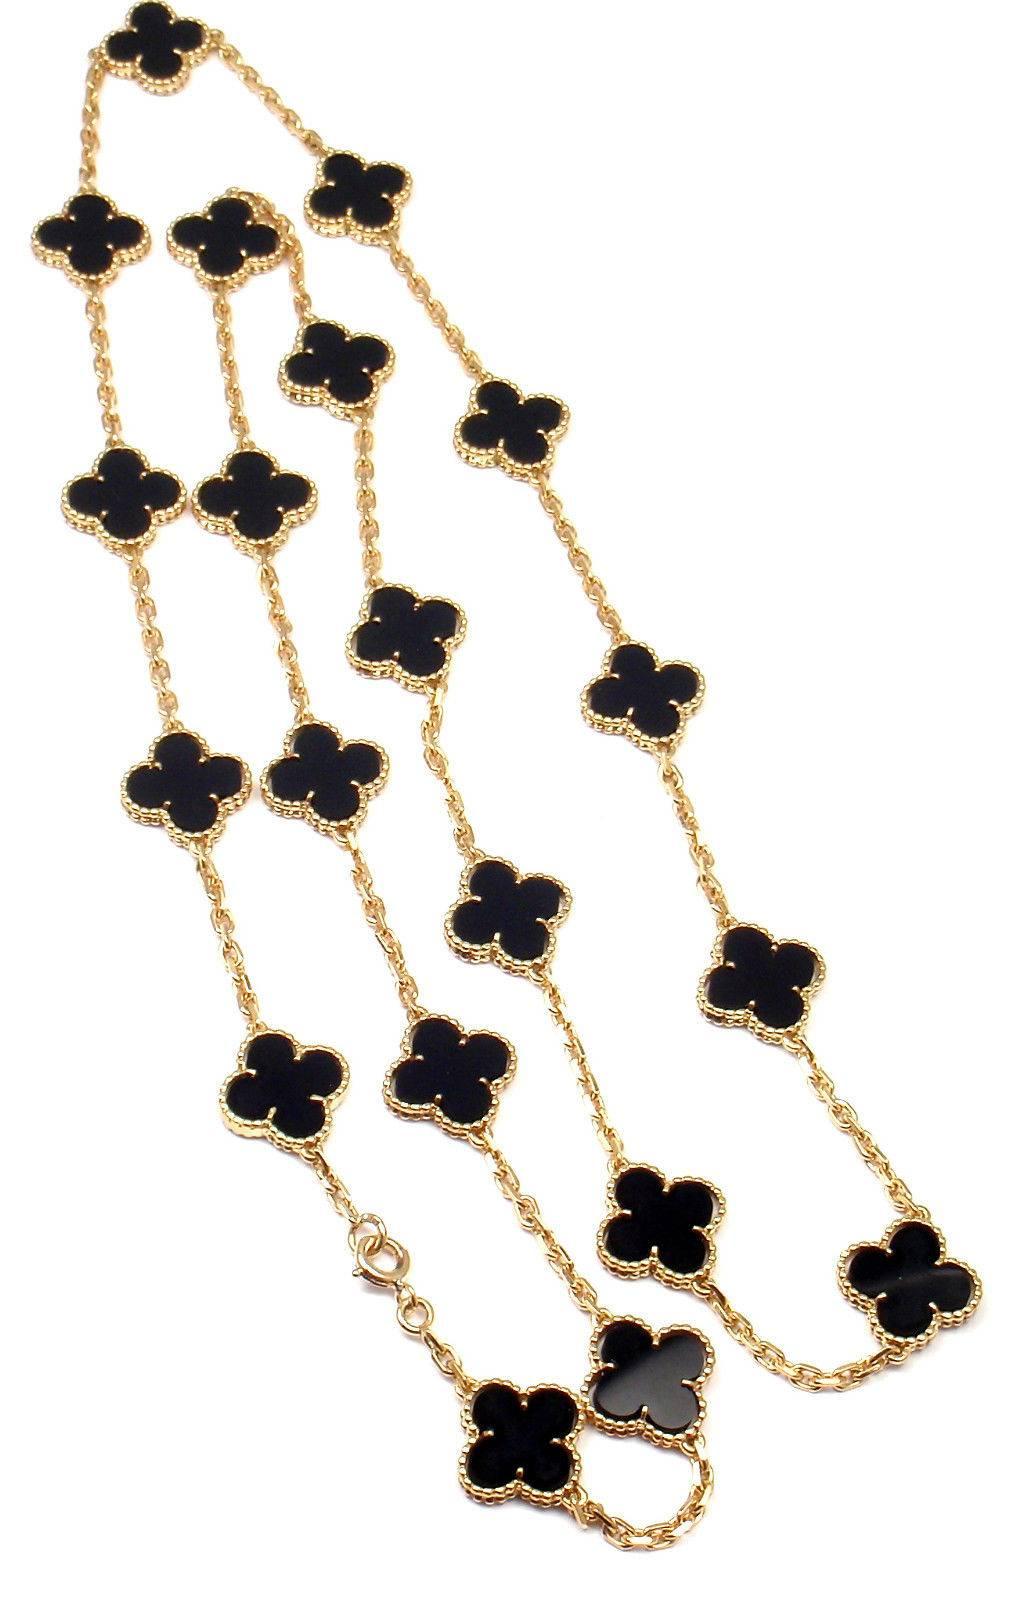 18k Yellow Gold Alhambra Twenty-Motif Black Onyx Necklace by
Van Cleef & Arpels, with 20 motifs of black onyx Alhambra stones, 15mm each.
This is a rare, very collectible, antique Van Cleef & Arpels black onyx alhambra necklace from